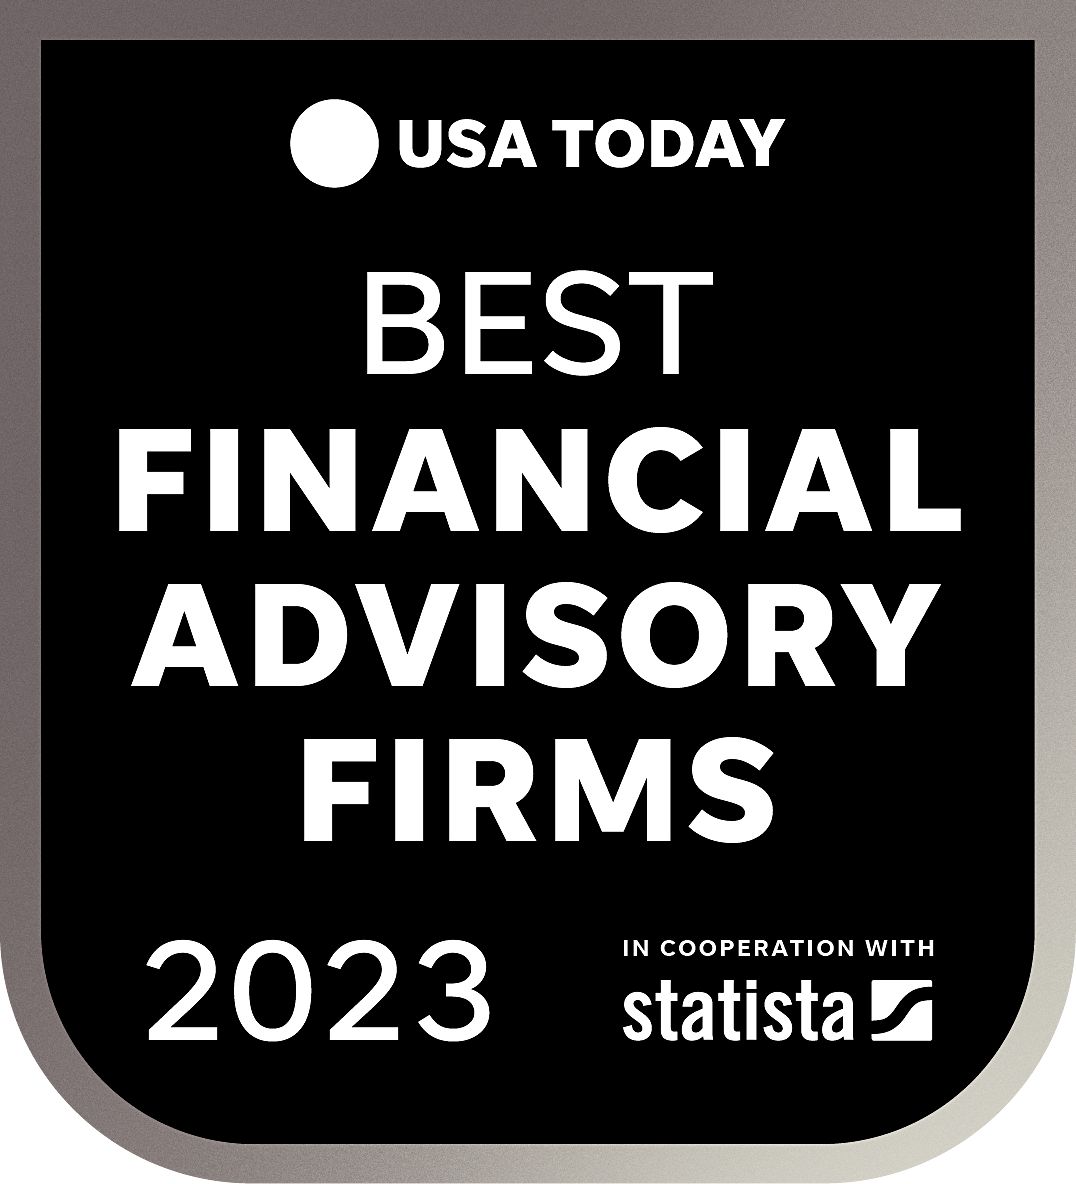 Cerity Partners chosen as Best Financial Advisory Firms in 2023 by USA Today.